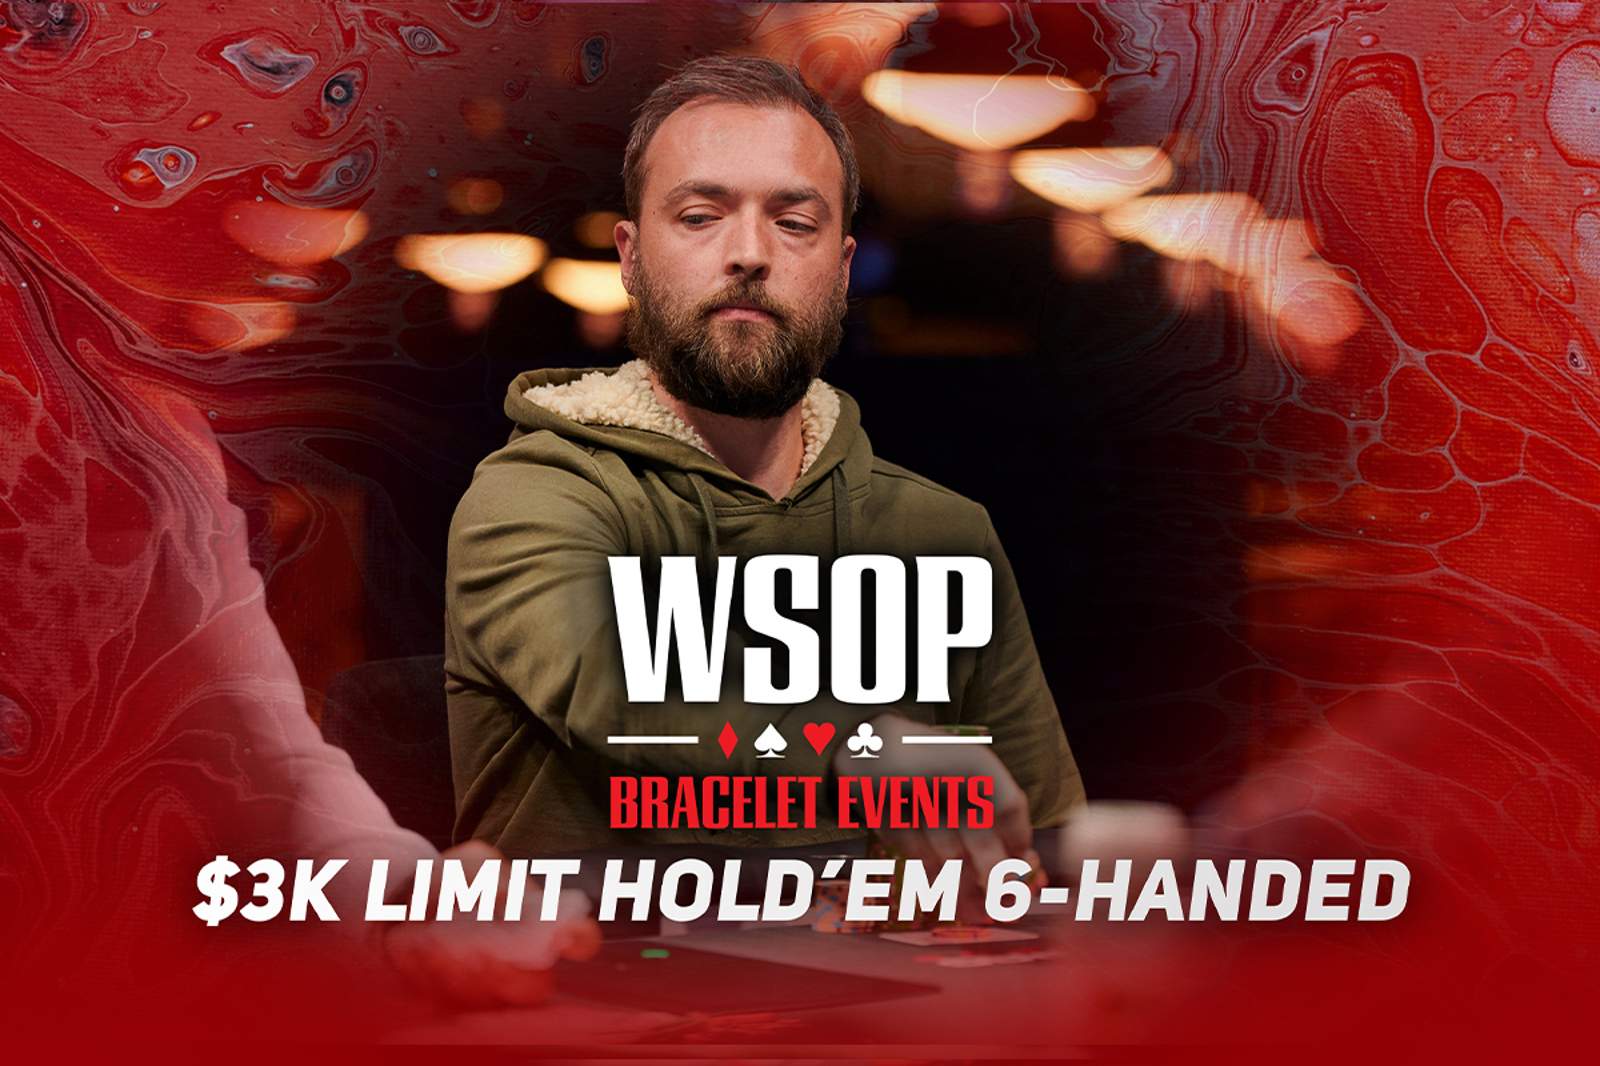 Watch the WSOP Event #44: $3K Limit Hold'em Final Table on PokerGO.com at 9 p.m. ET